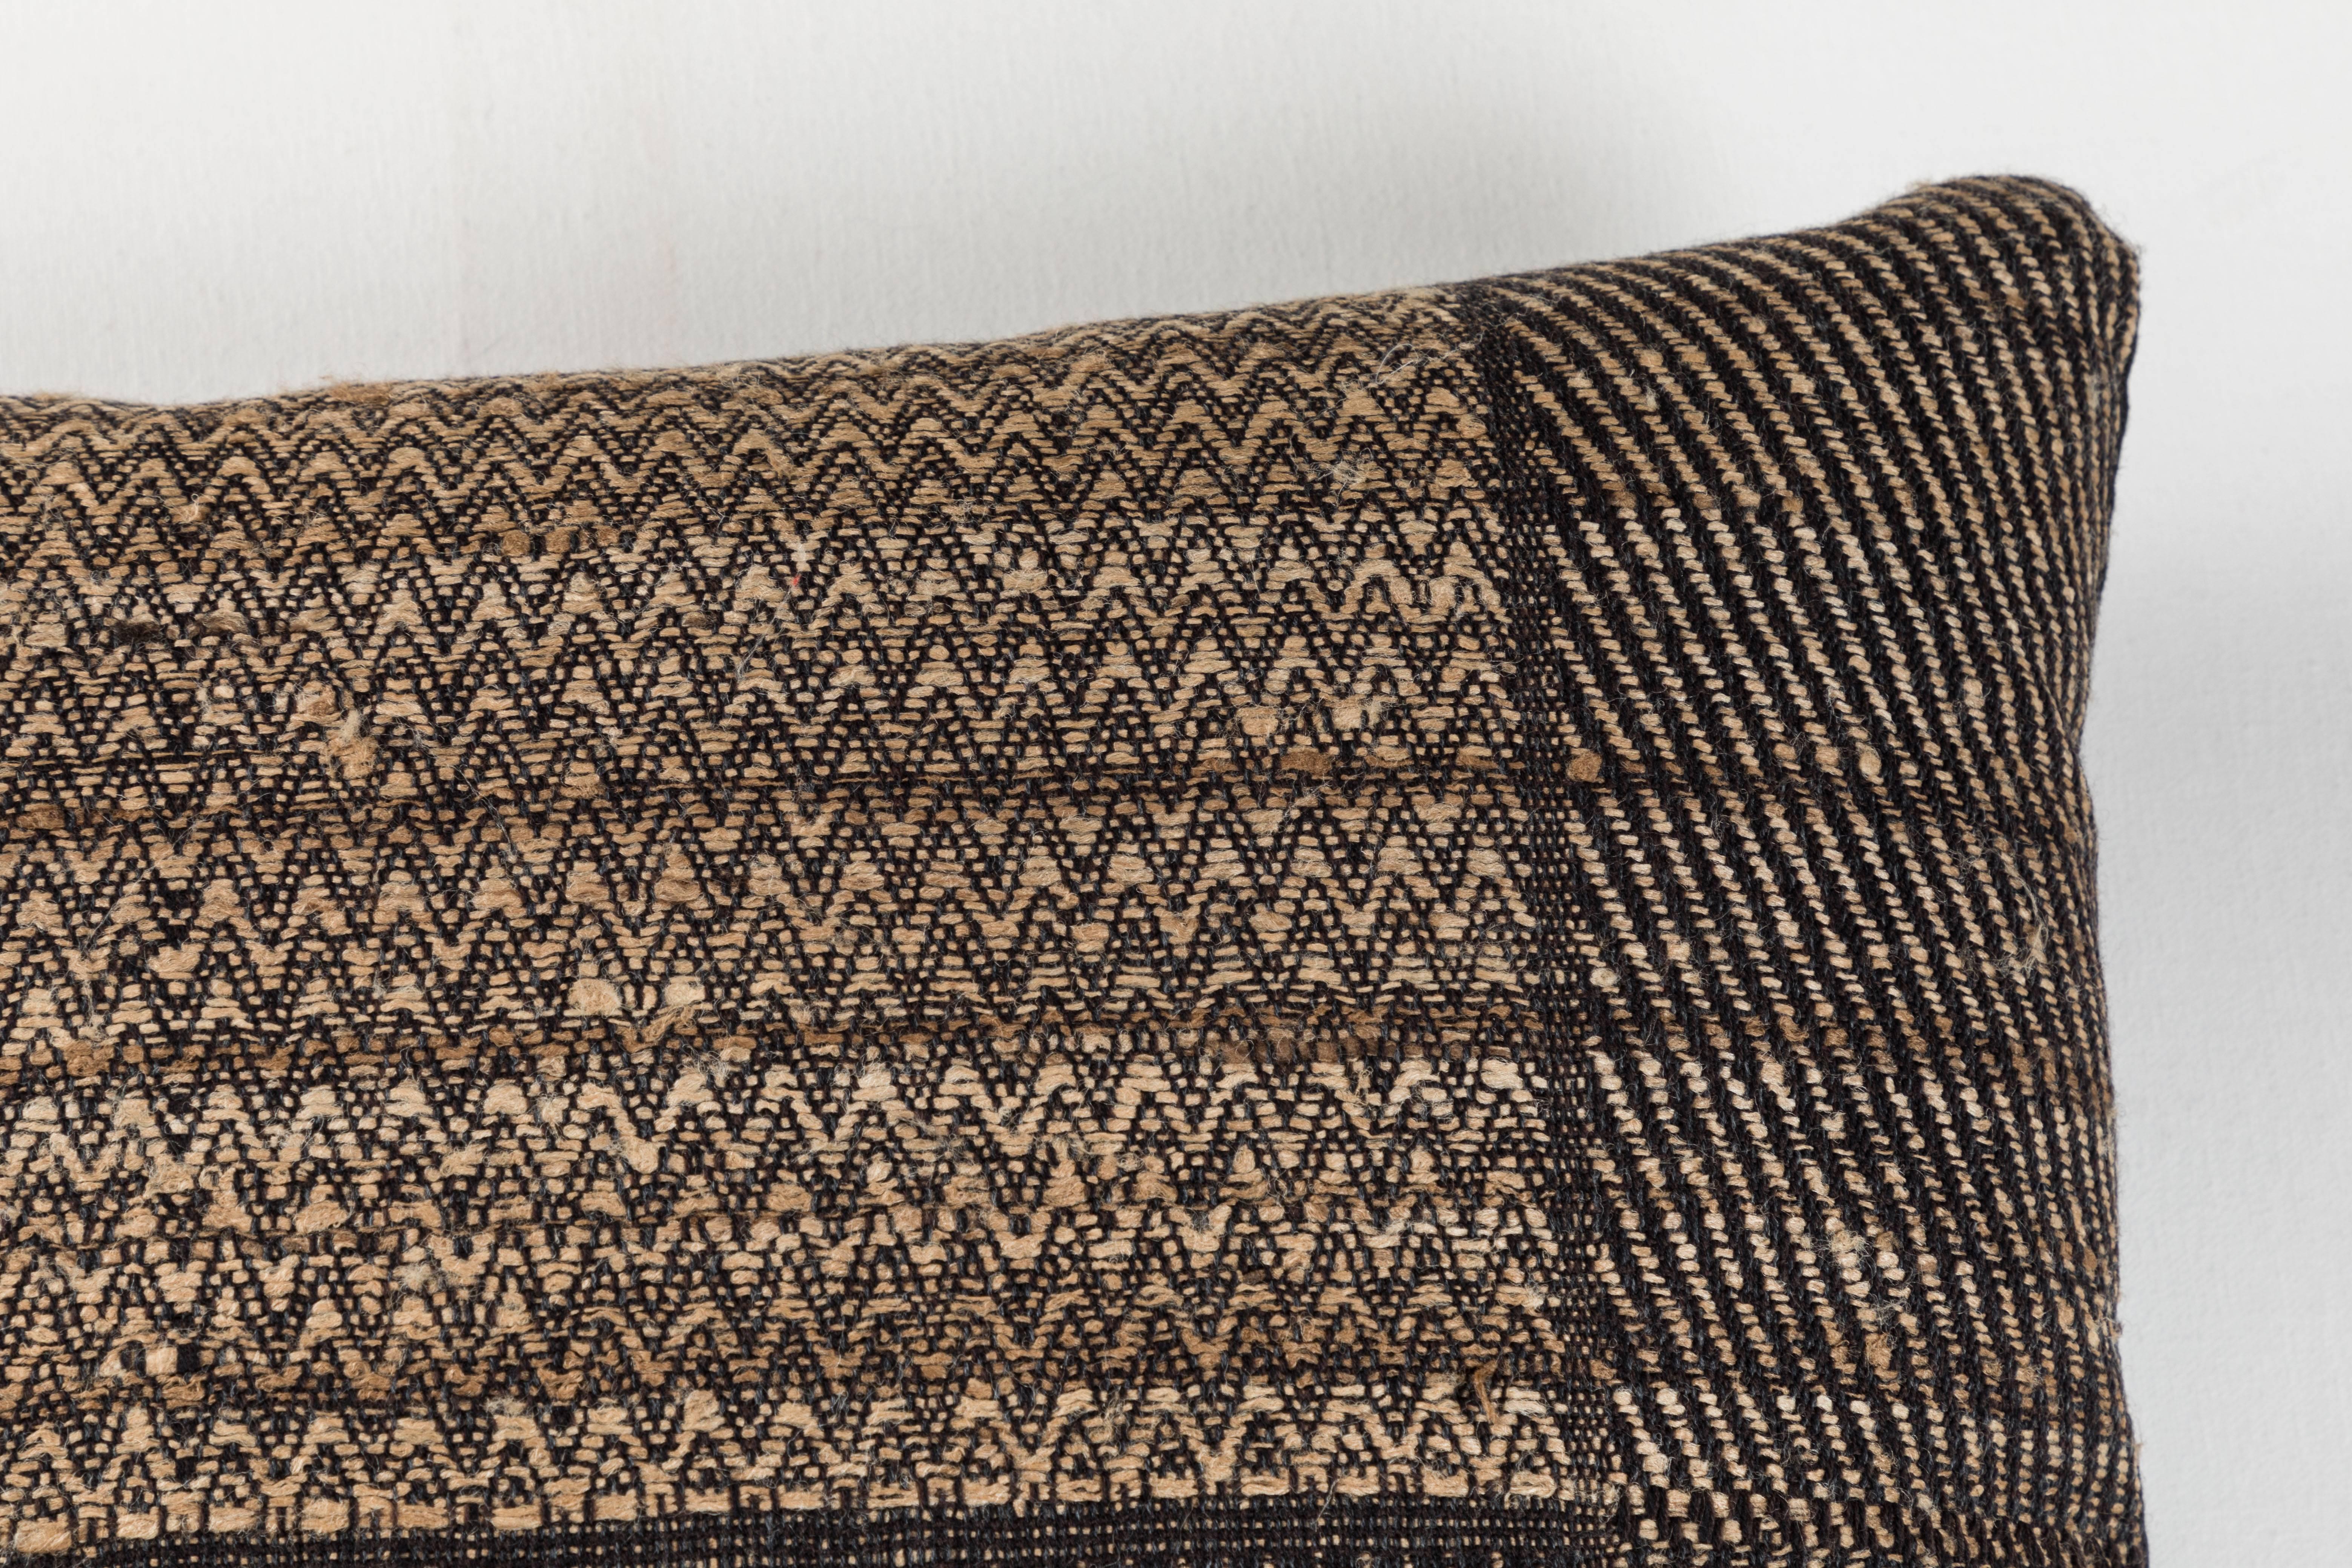 Pat McGann Workshop. 
A contemporary line of cushions, pillows, throws, bedcovers, bedspreads and yardage handwoven in India on antique Jacquard looms. Hand spun wool, cotton, linen, and raw silk give the textiles an appealing uneven quality. Sizes